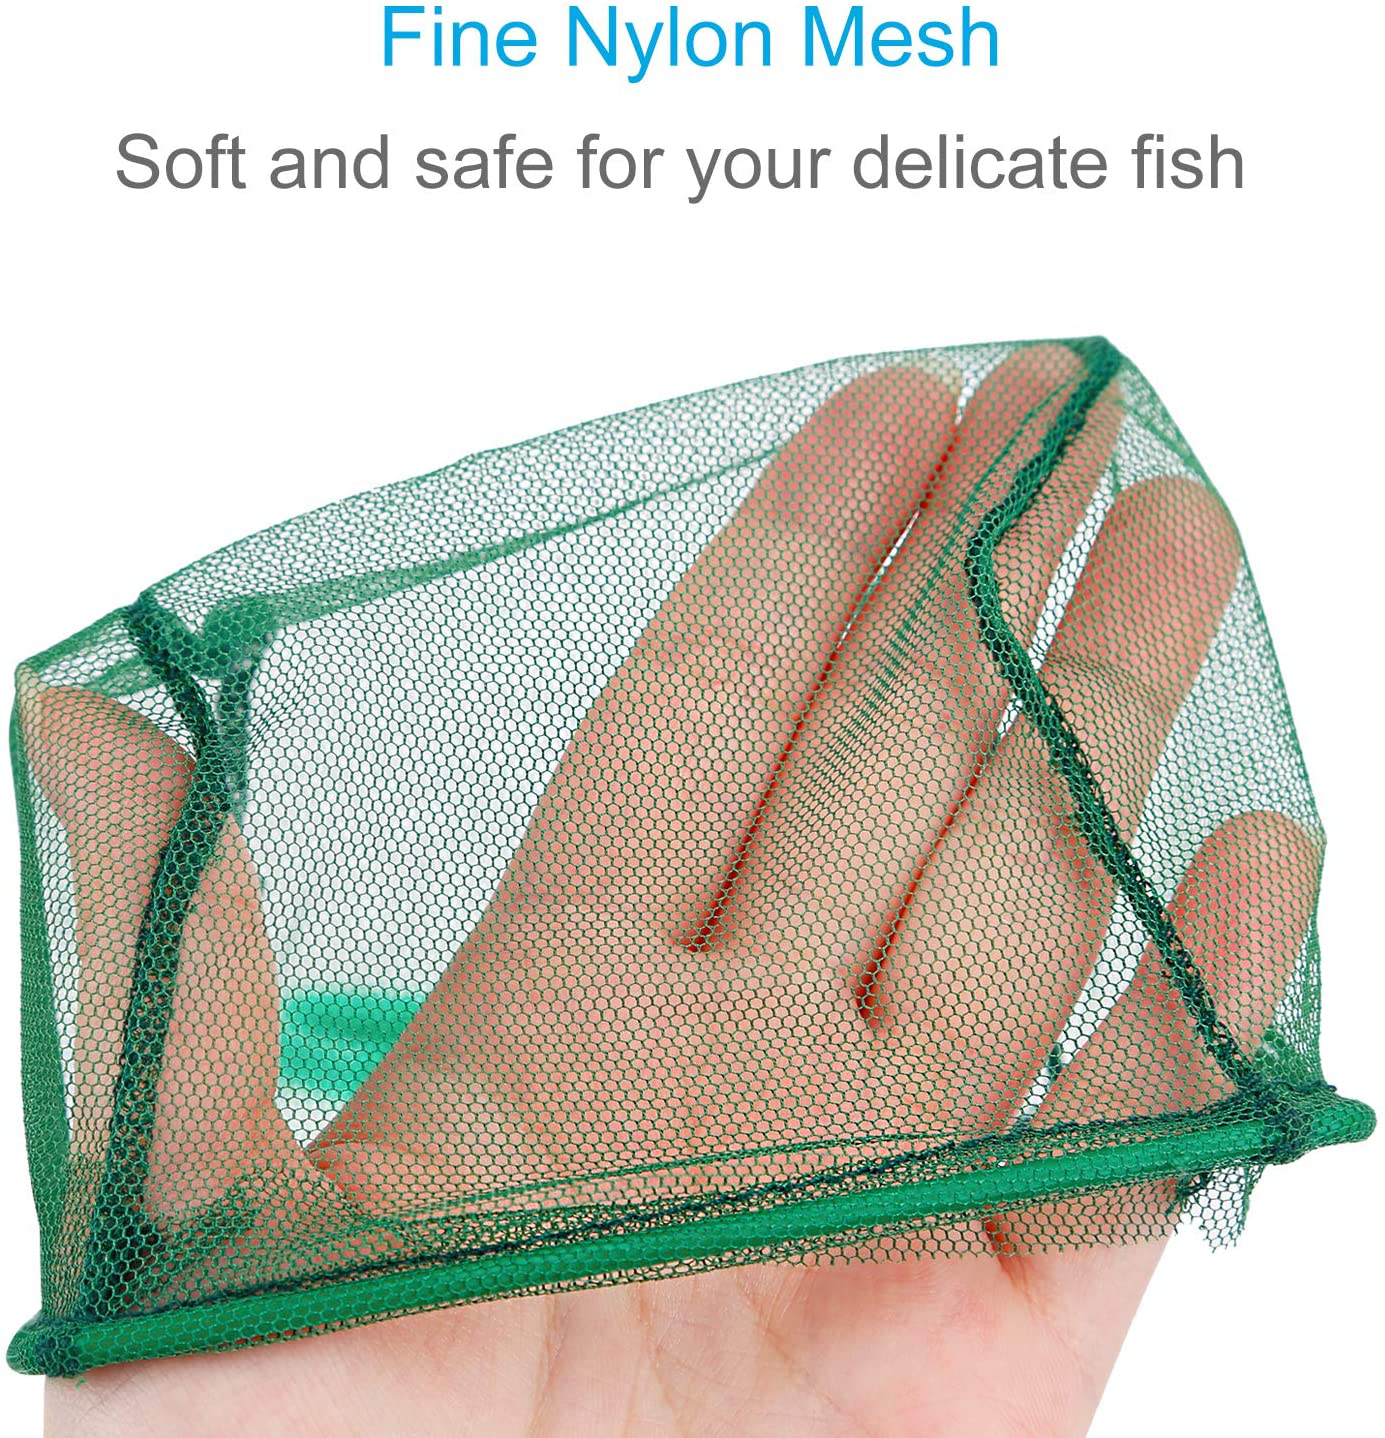 Pawfly 4 Inch Aquarium Net Fine Mesh Small Fish Catch Nets with